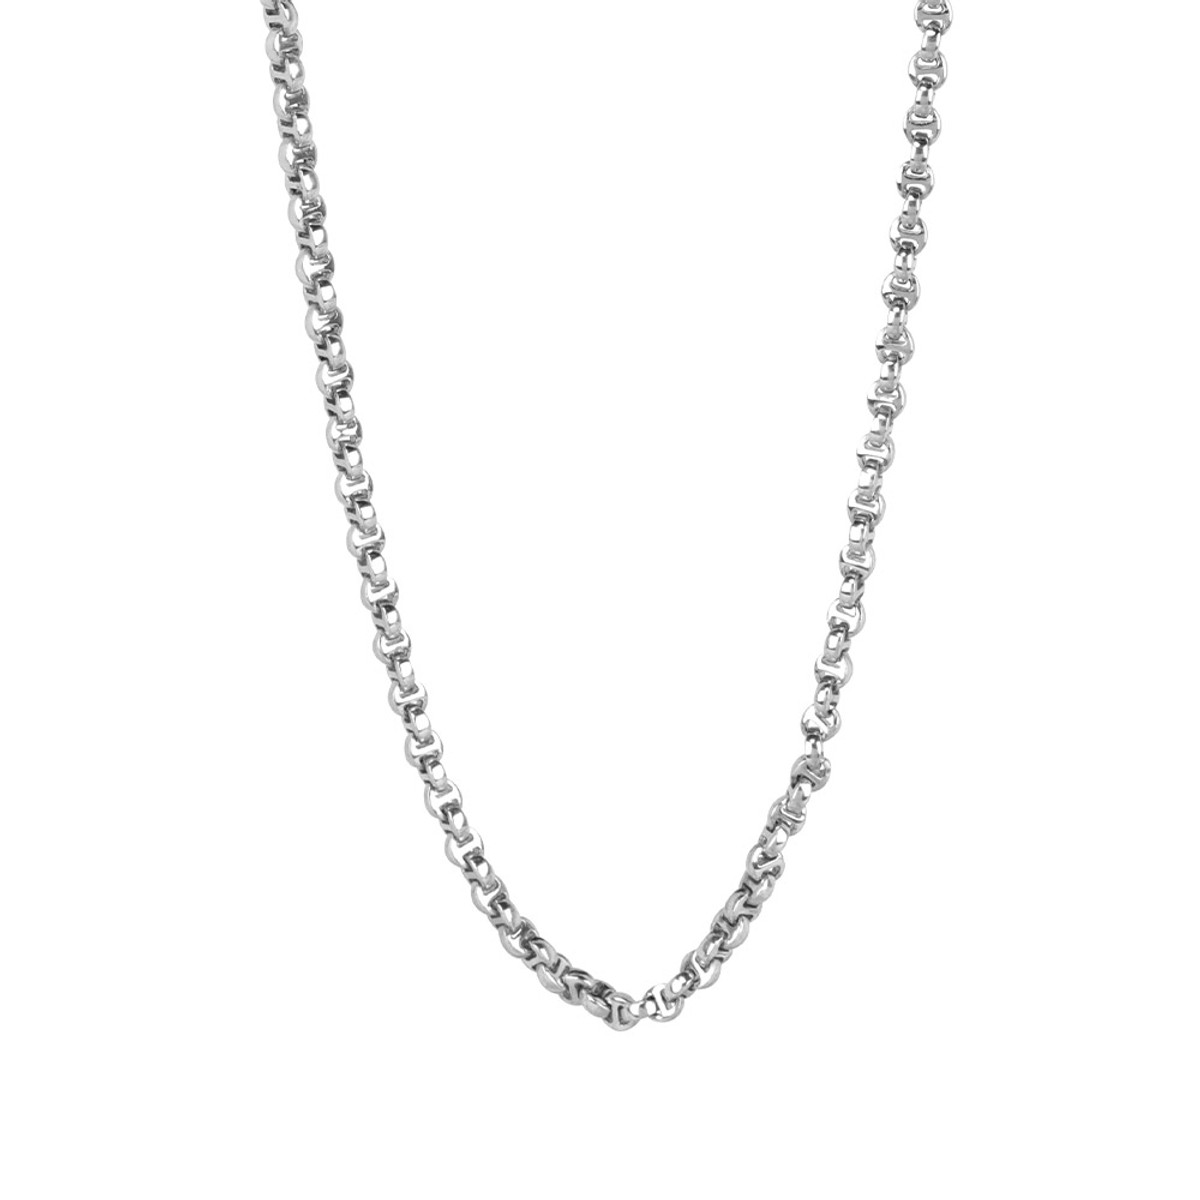 Hoorsenbuhs Sterling Silver Open-Link Diamond Toggle Nicro Chain Necklace- 26"-57500 Product Image